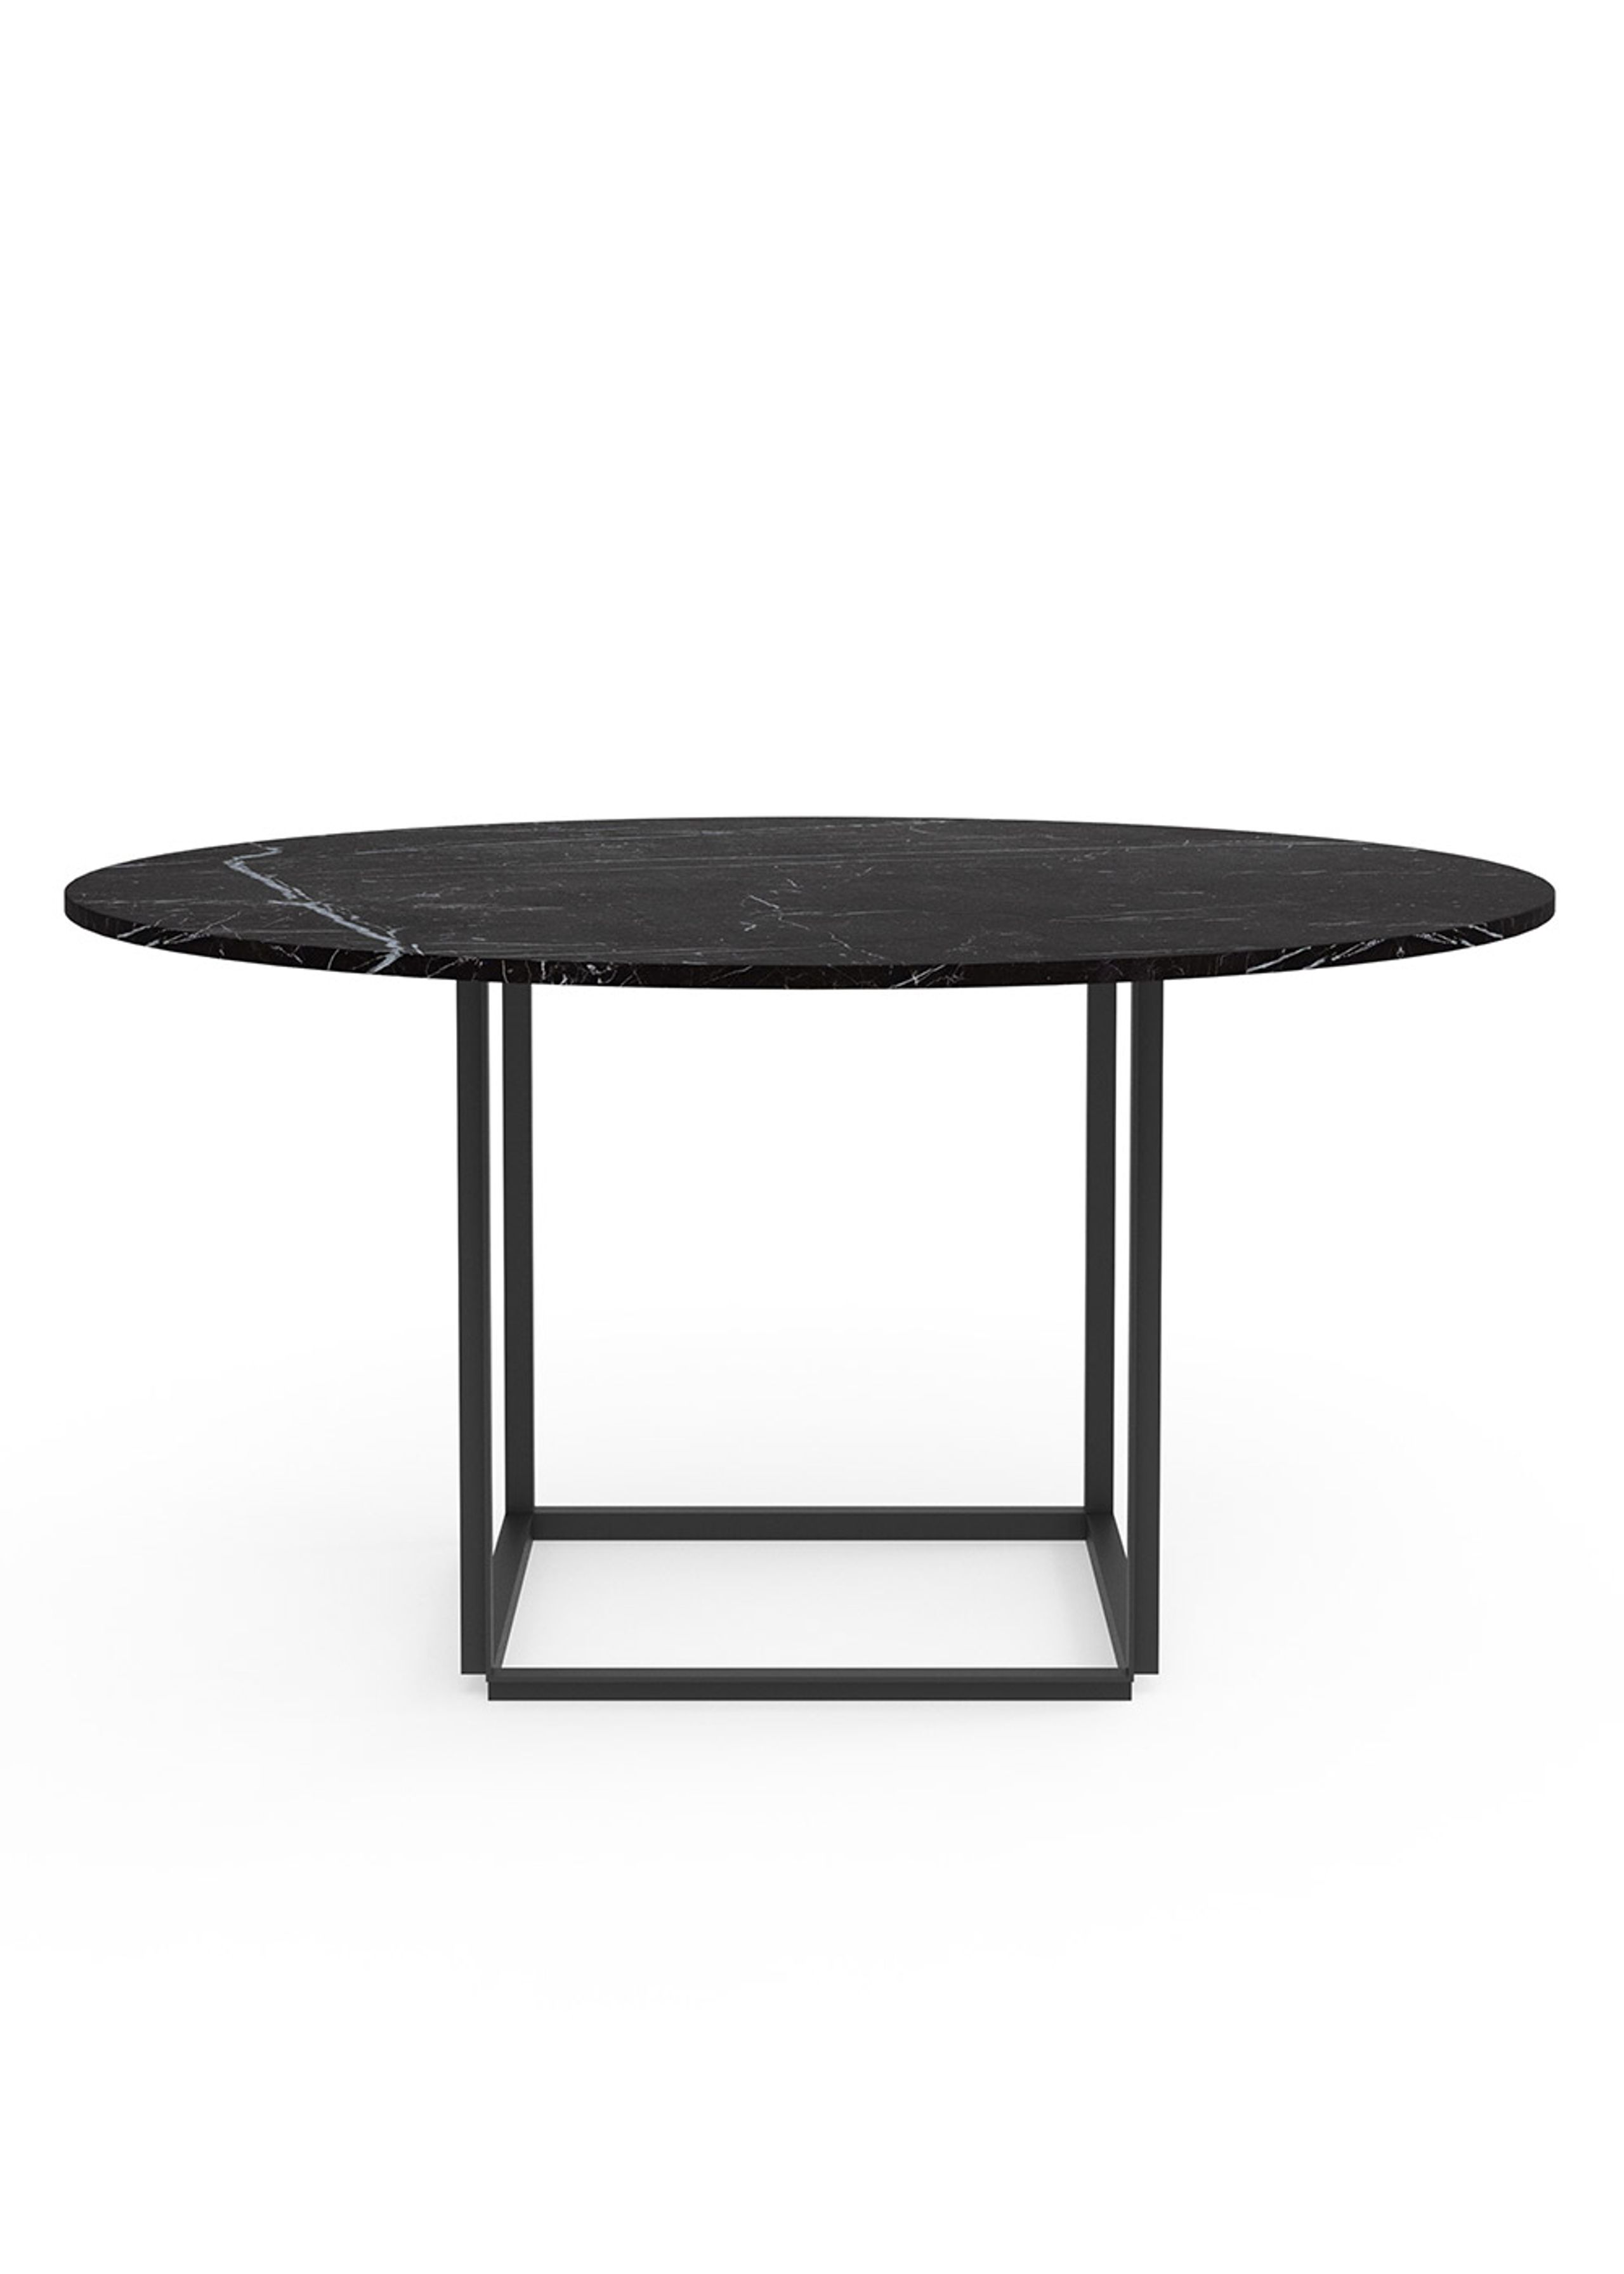 New Works - Eettafel - Florence Dining Table Ø145 - Black Marquina w. Black Frame